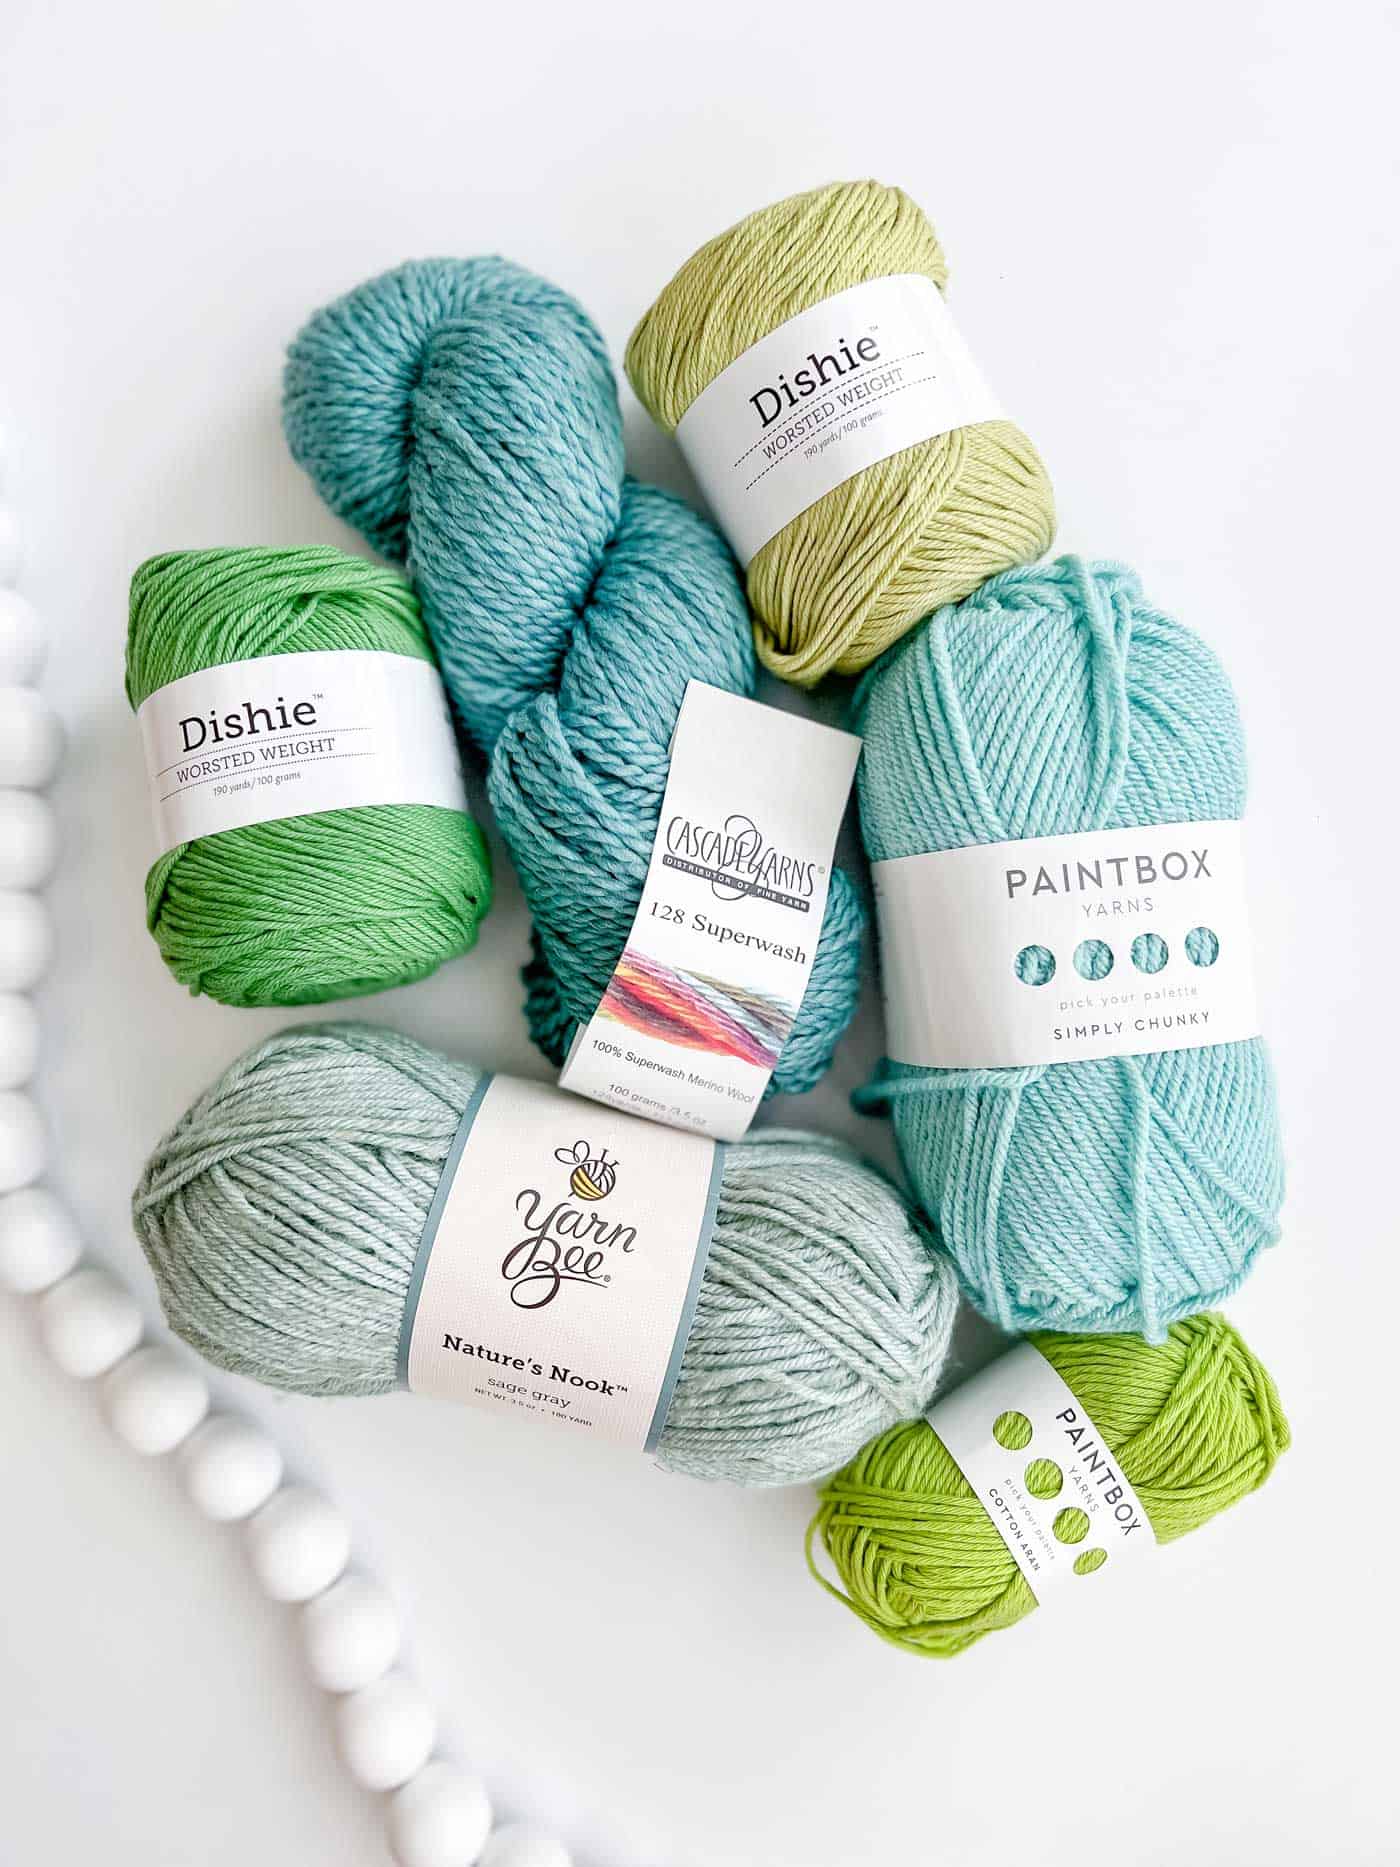 How To Choose Yarn Colors For Crochet Projects (With Pictures)